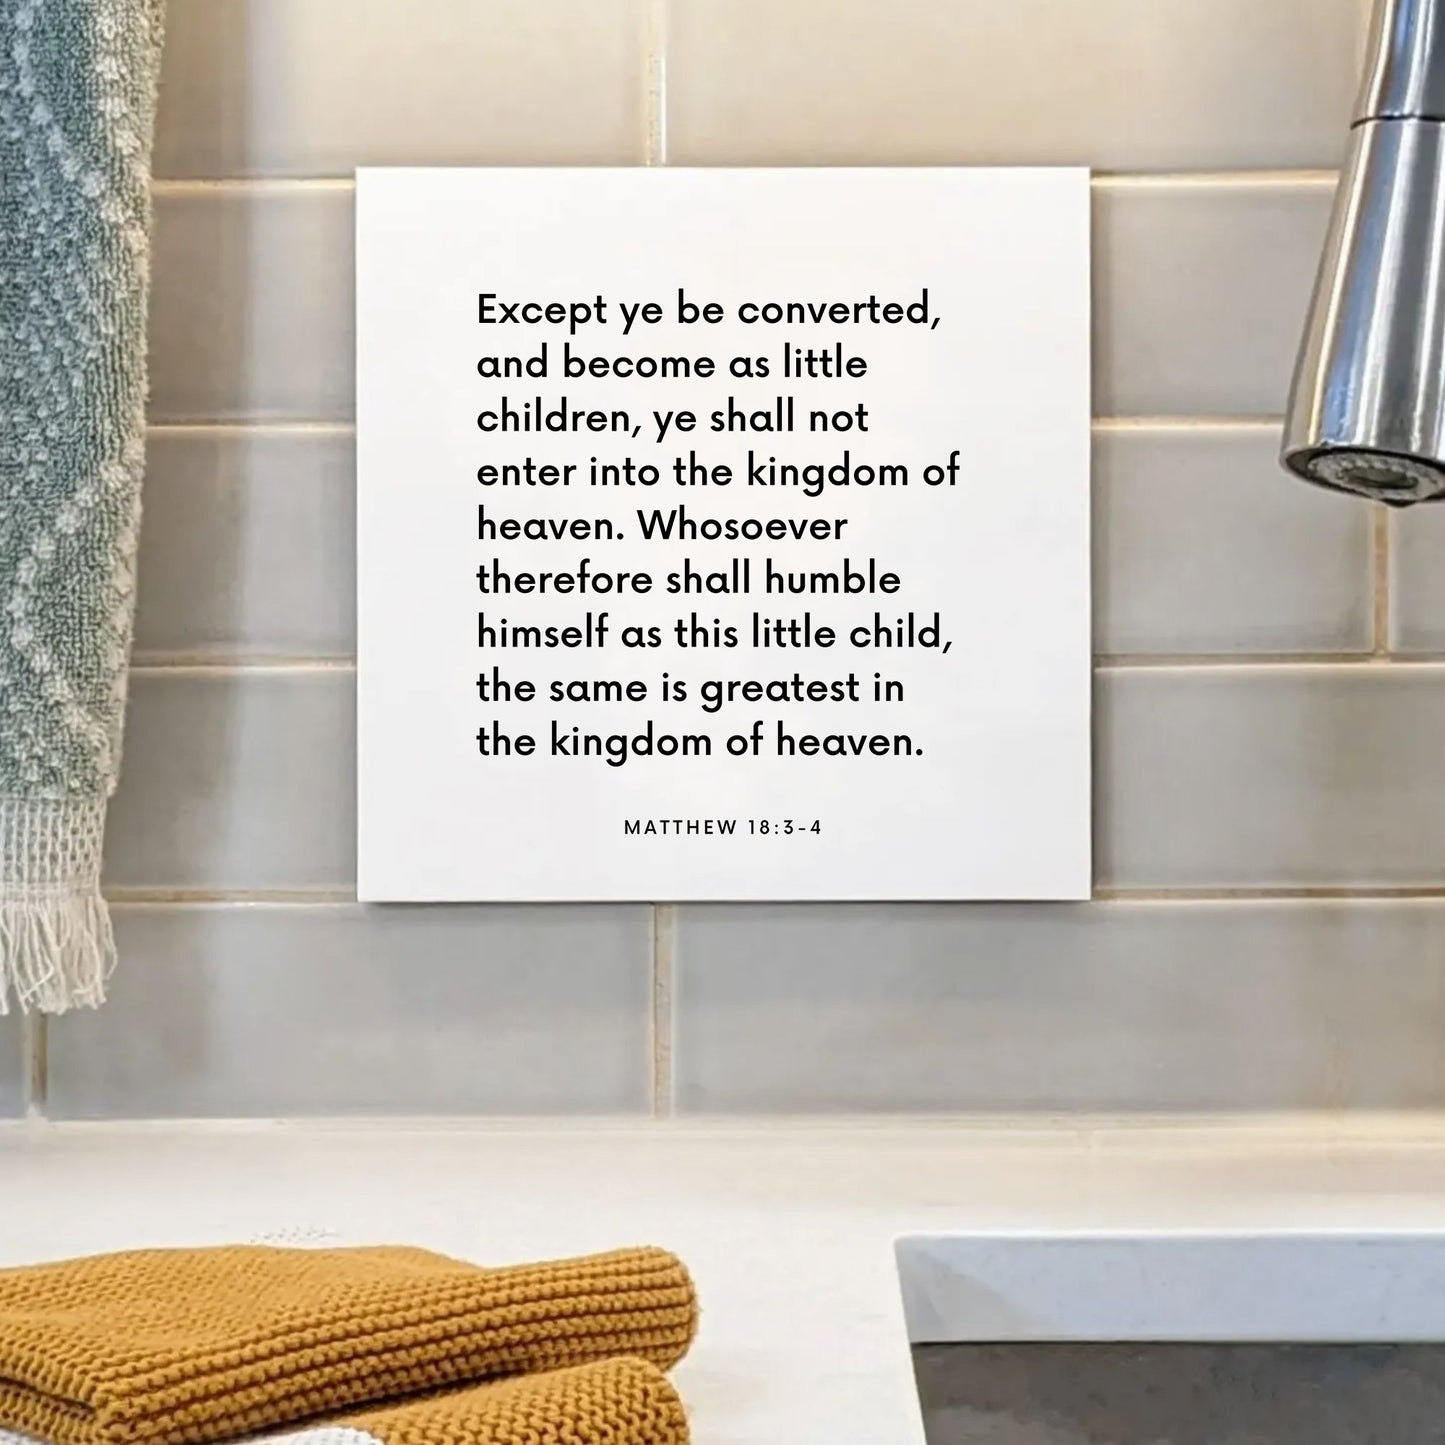 Sink mouting of the scripture tile for Matthew 18:3-4 - "Except ye be converted, and become as little children"